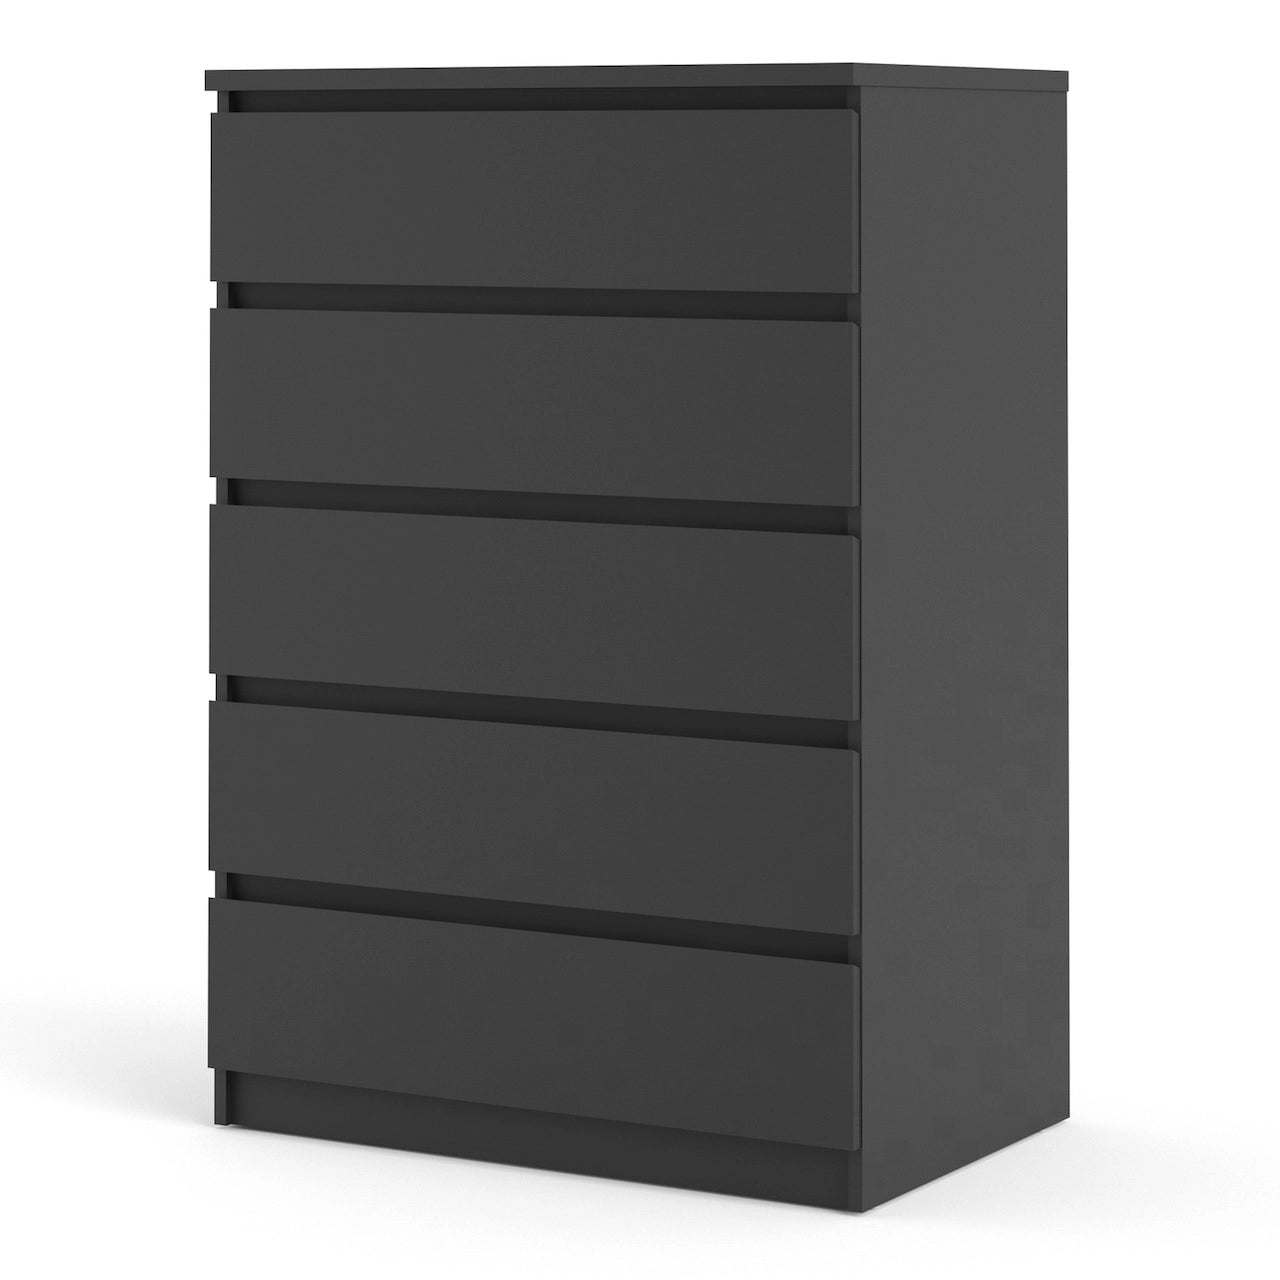 Furniture To Go Naia Chest of 5 Drawers in Black Matt